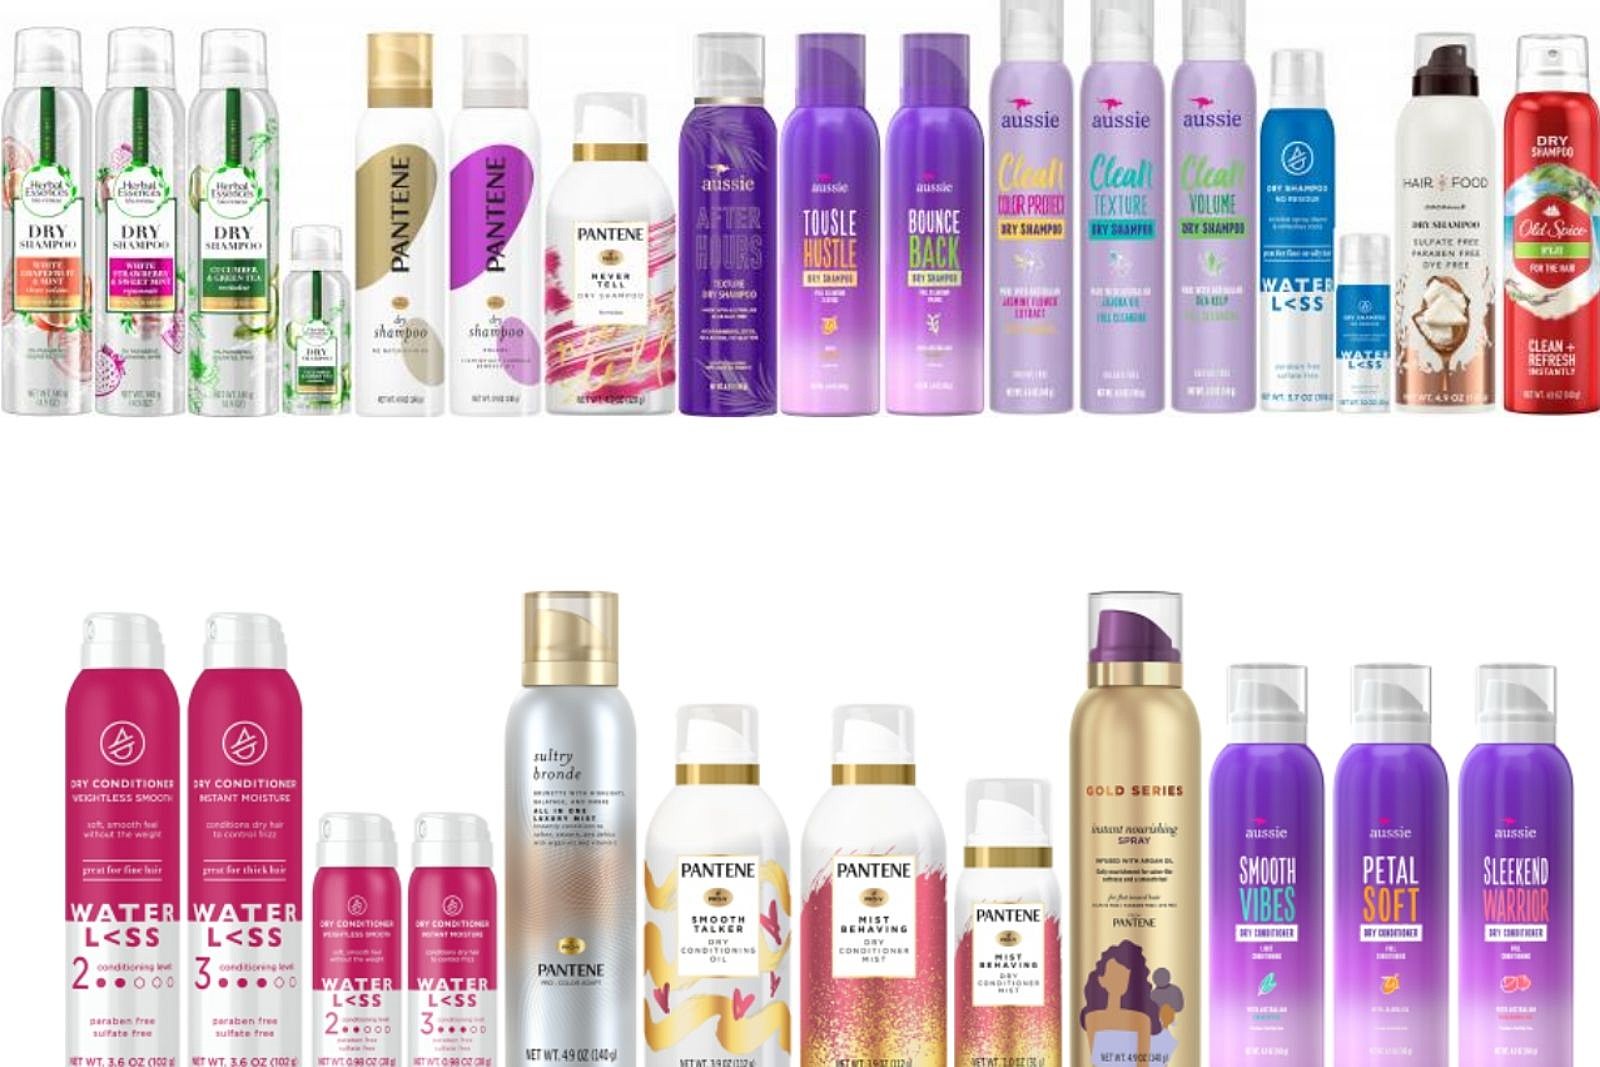 Stop these: Recall of major brands of shampoo,